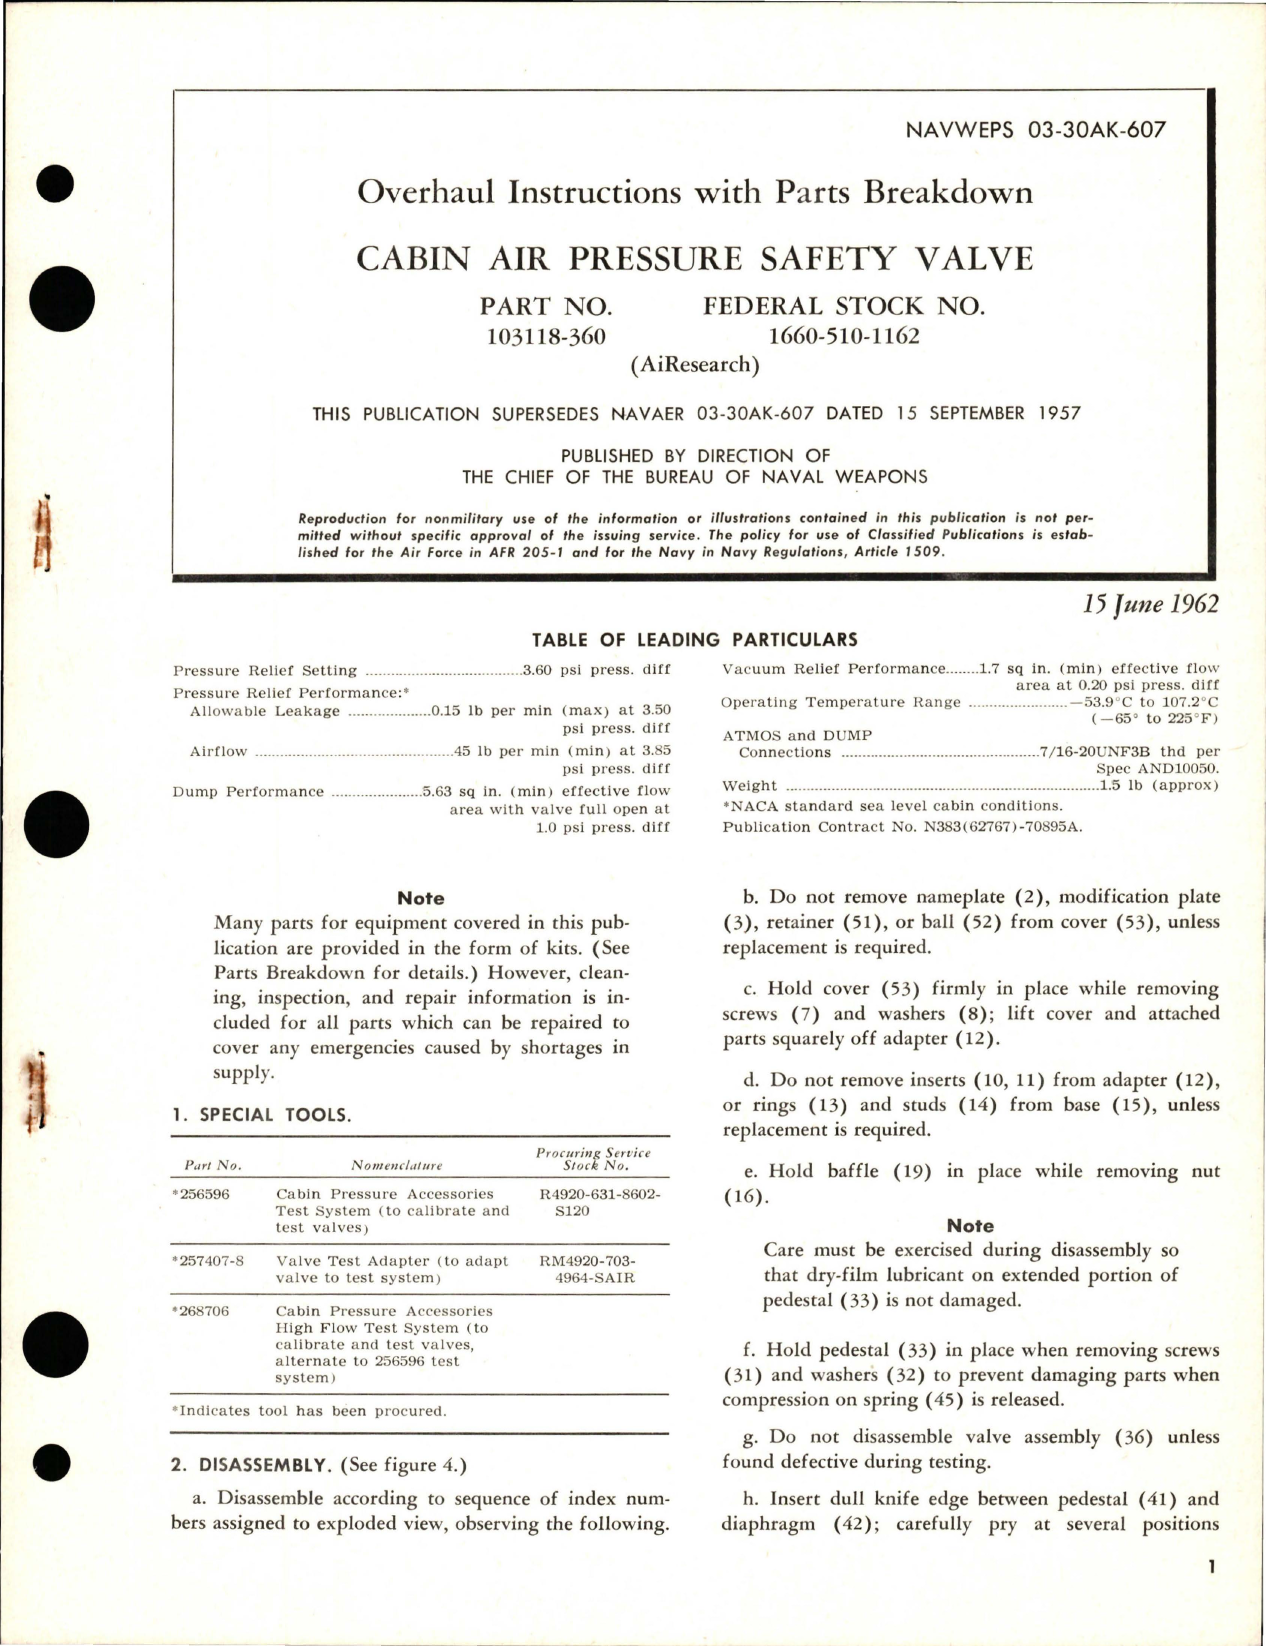 Sample page 1 from AirCorps Library document: Overhaul Instructions with Parts Breakdown for Cabin Air Pressure Safety Valve - Part 103118-360